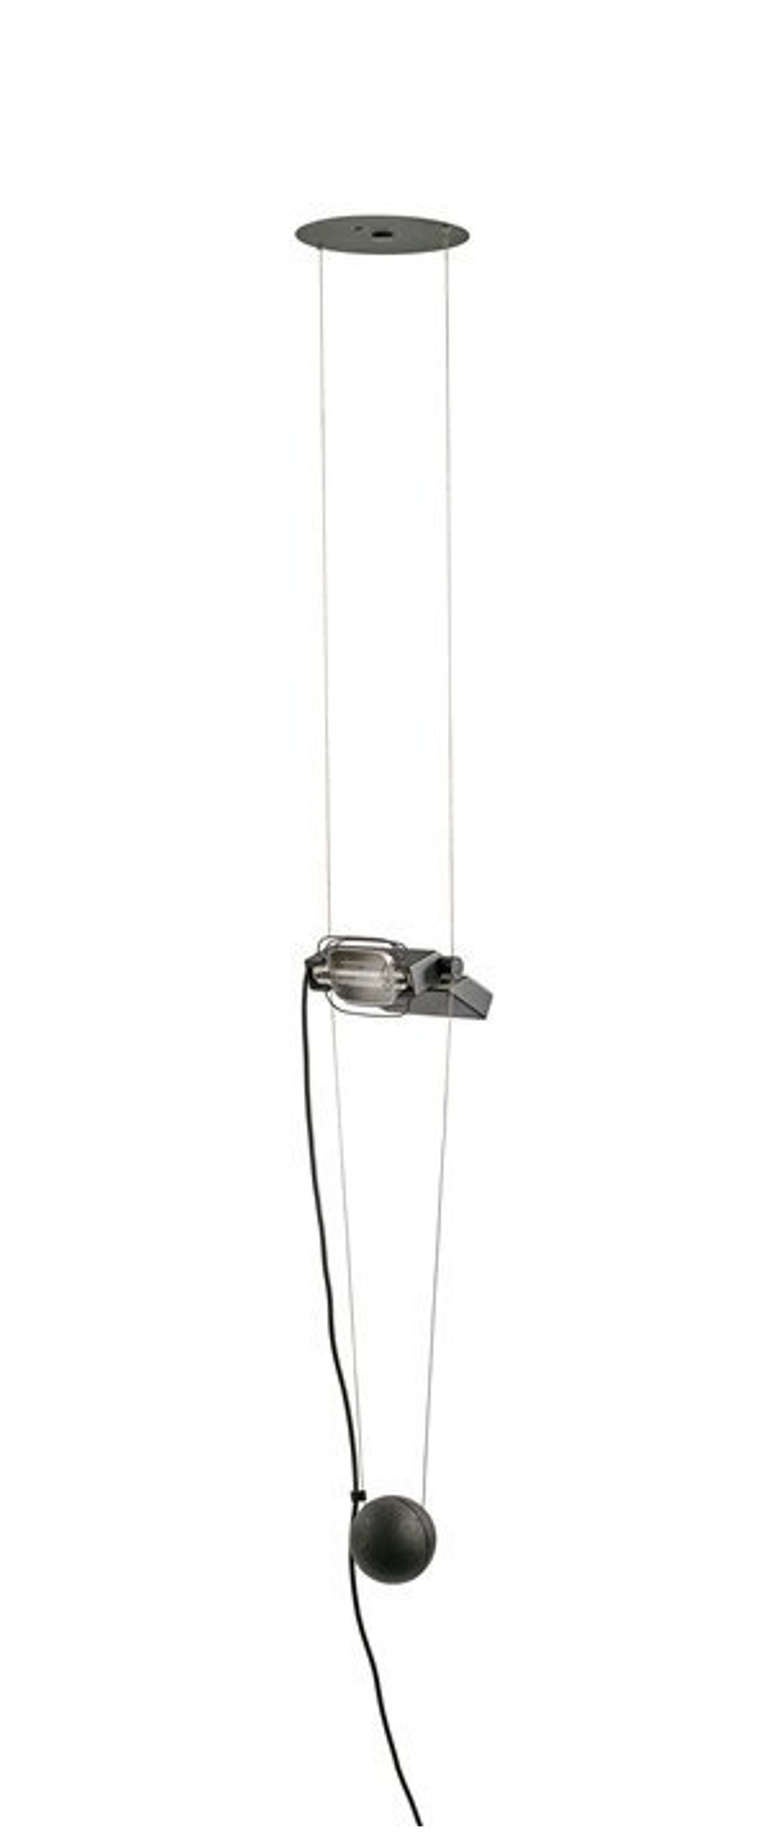 Pair of Ceiling Mounted Abolla Suspension Lamps by Artemide.  The lamps can be suspended from any height ceiling to floor, weighted with a enameled iron sphere.  They swivel and articulate to virtually any position and have a slide dimmer on the